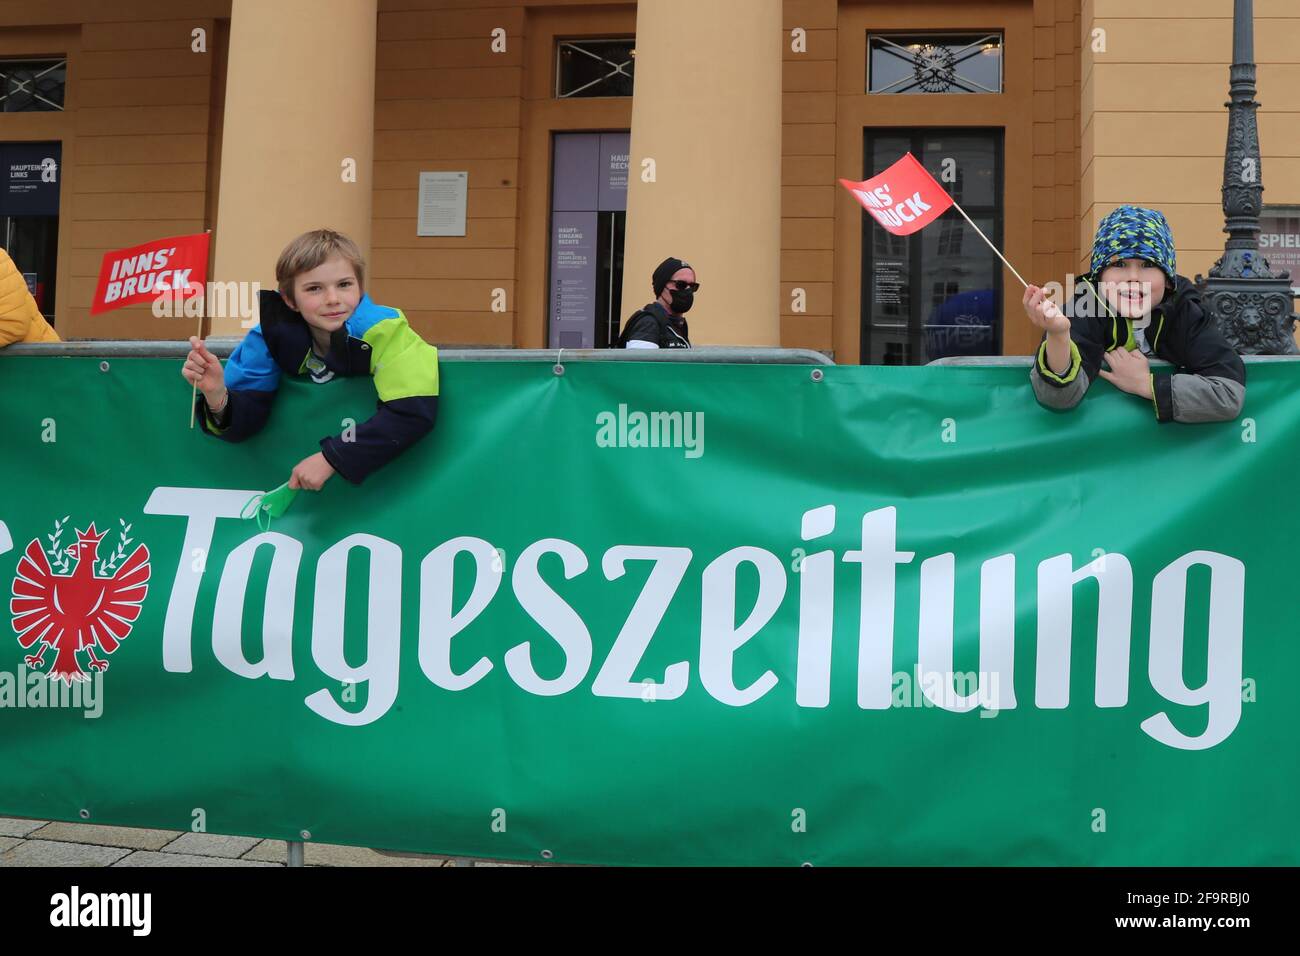 20th April 2021; Cycling Tour of the Alps Stage 2, Innsbruck, Feichten Im Kaunertal Austria Apr 20th; Interested children from Austria in front of Tageszeitung banner. Stock Photo